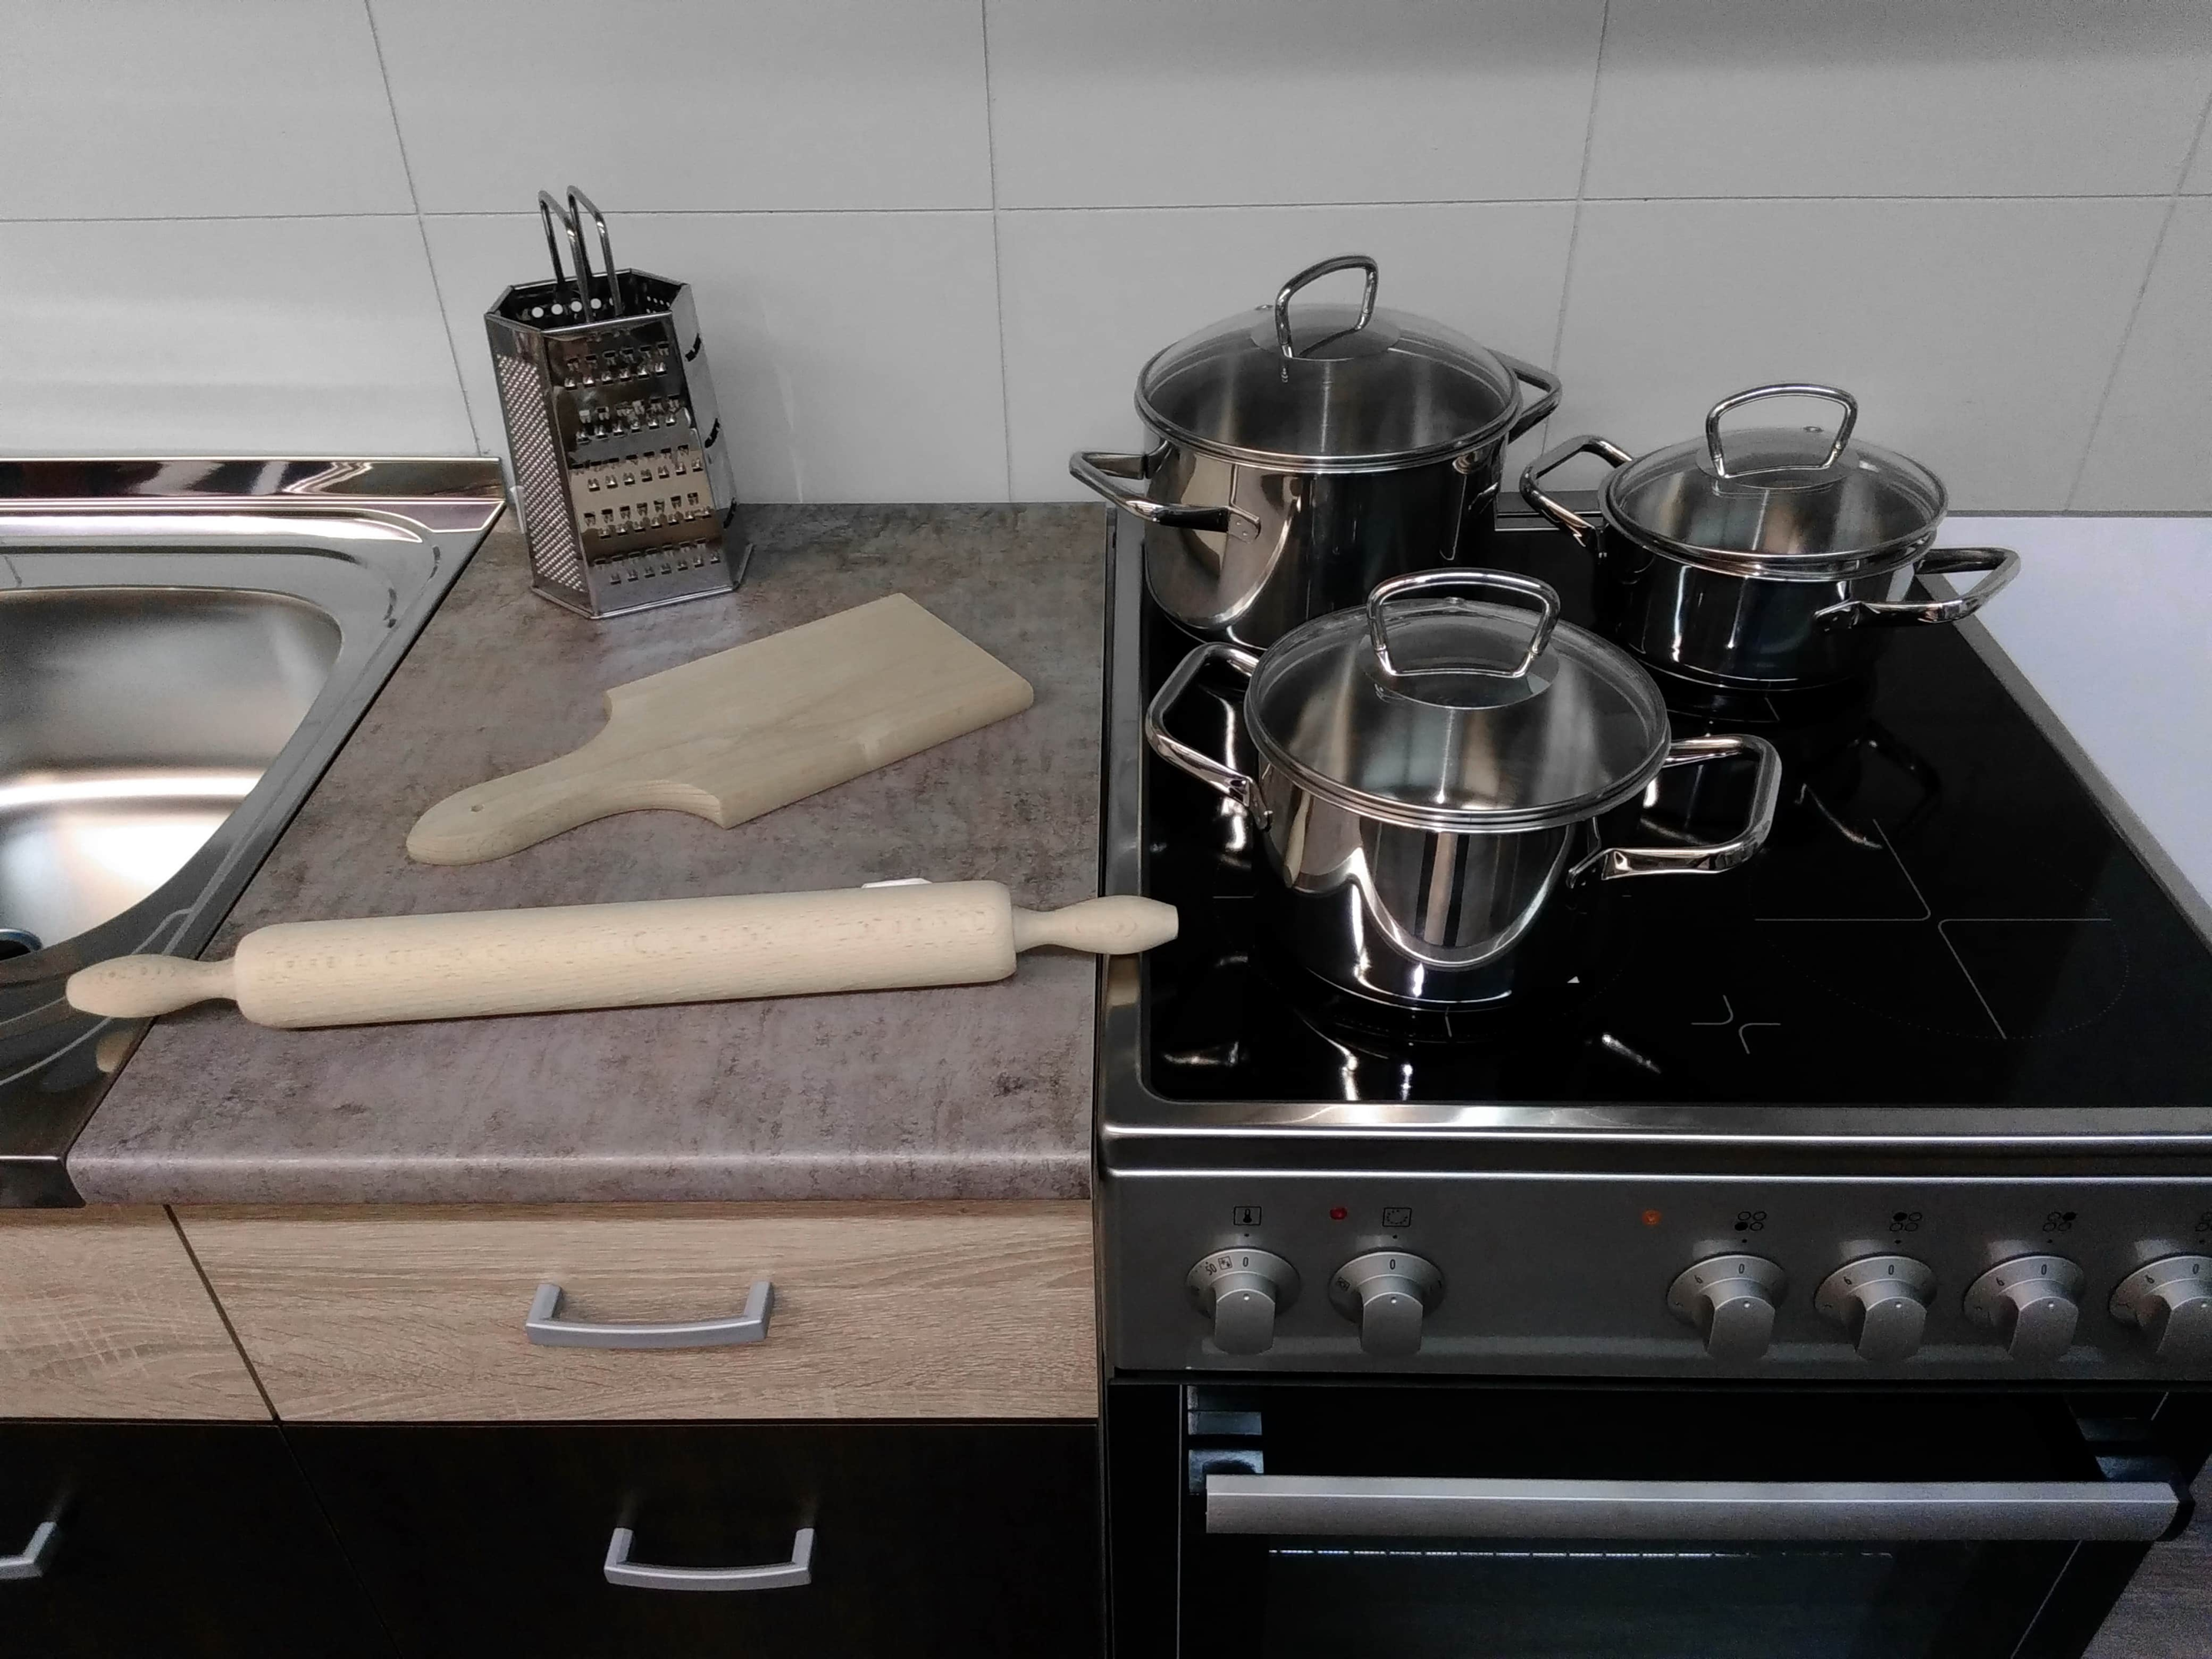 CLEANING INDUCTION COOKTOP, KITCHEN NEEDS,